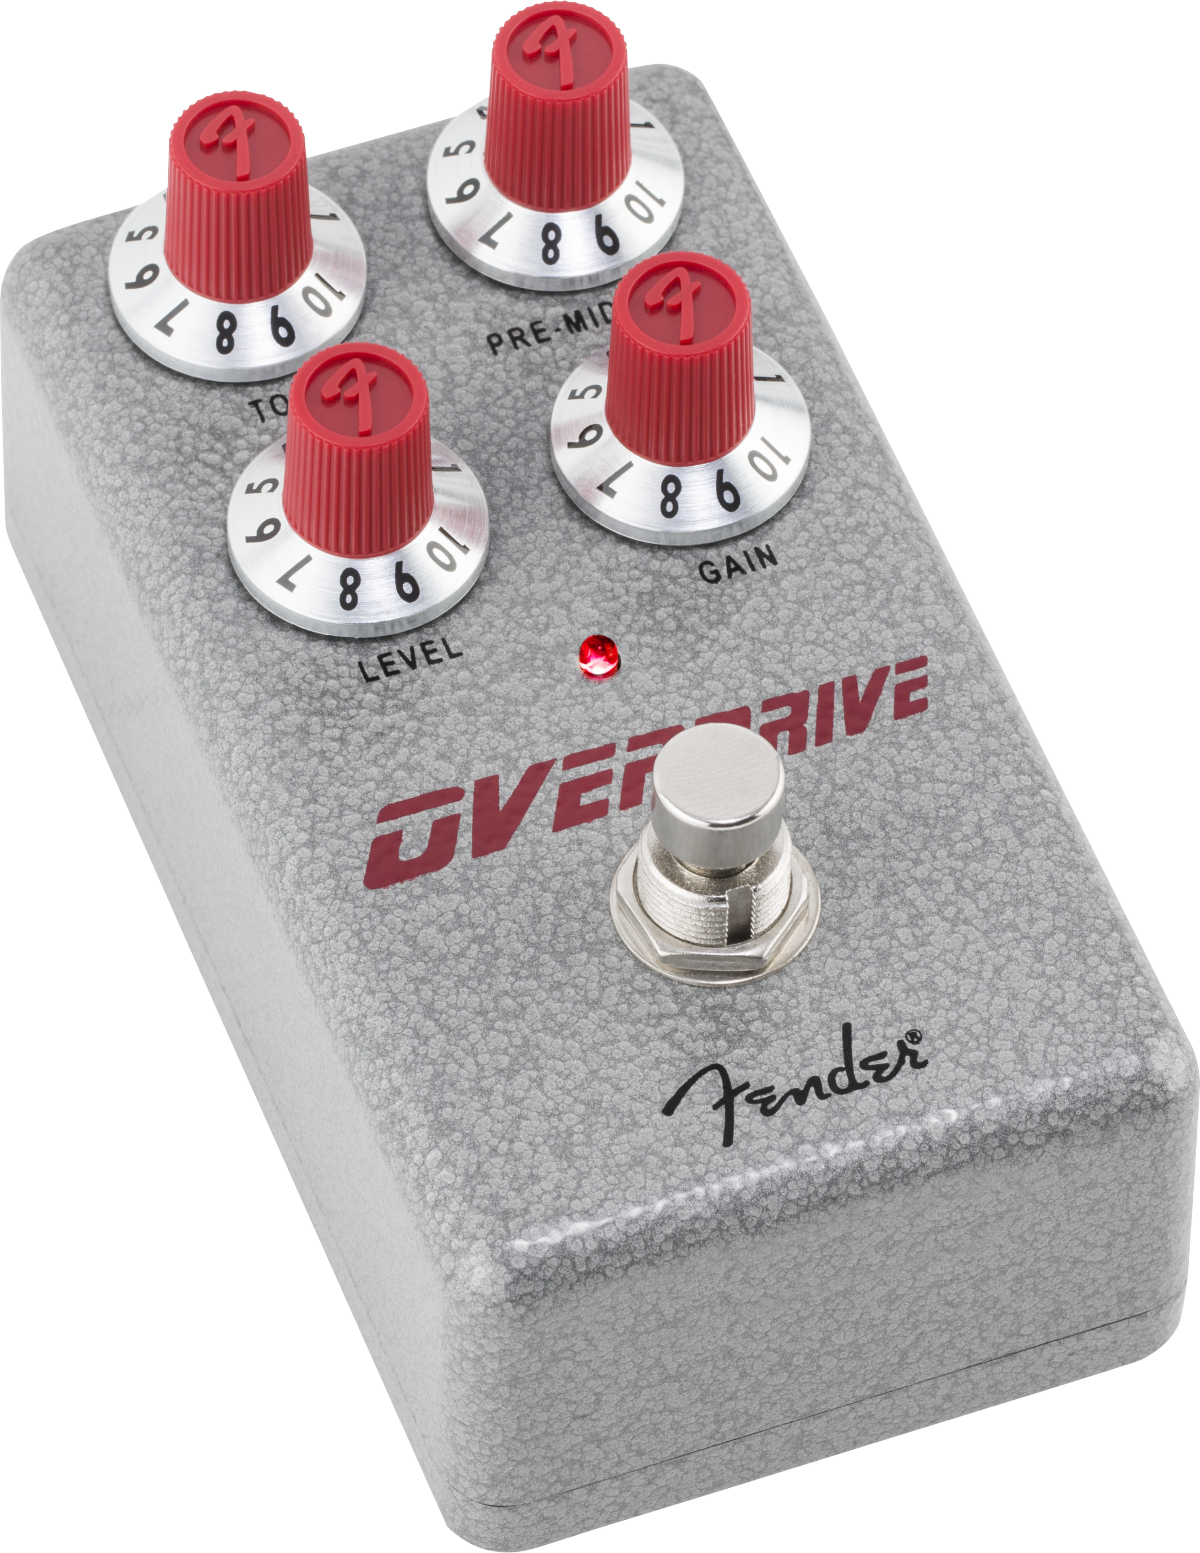 Fender Hammertone Overdrive - Overdrive, distortion & fuzz effect pedal - Main picture